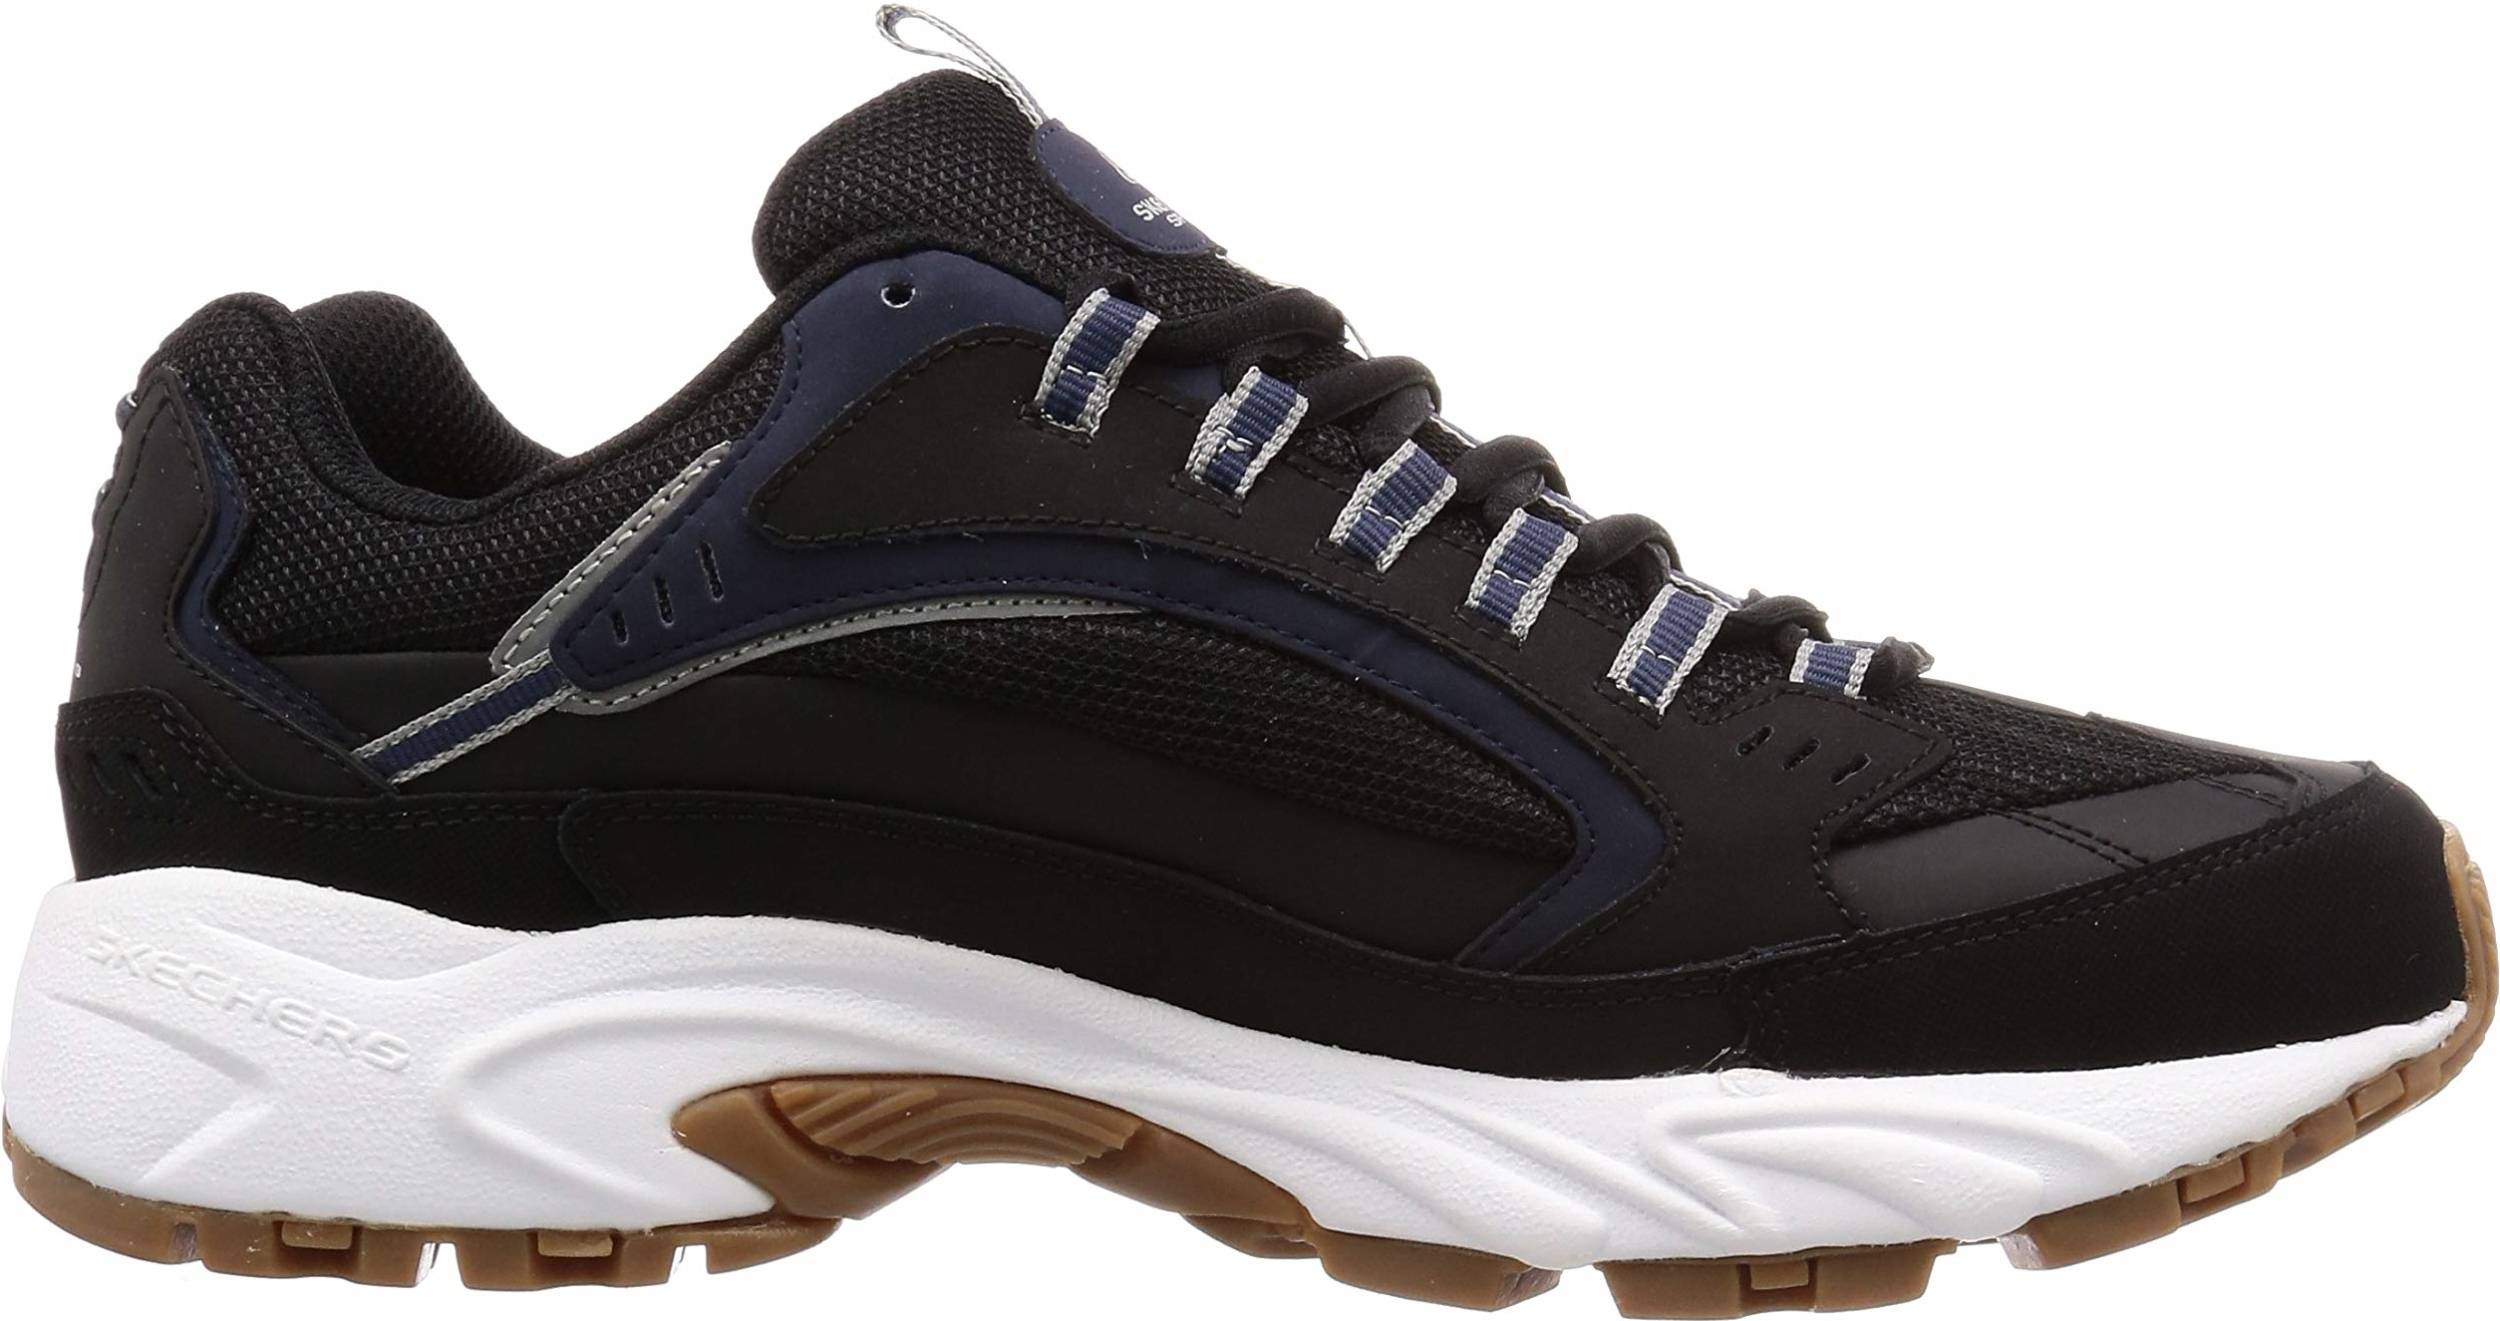 Save 41% on Cheap Workout Shoes (33 